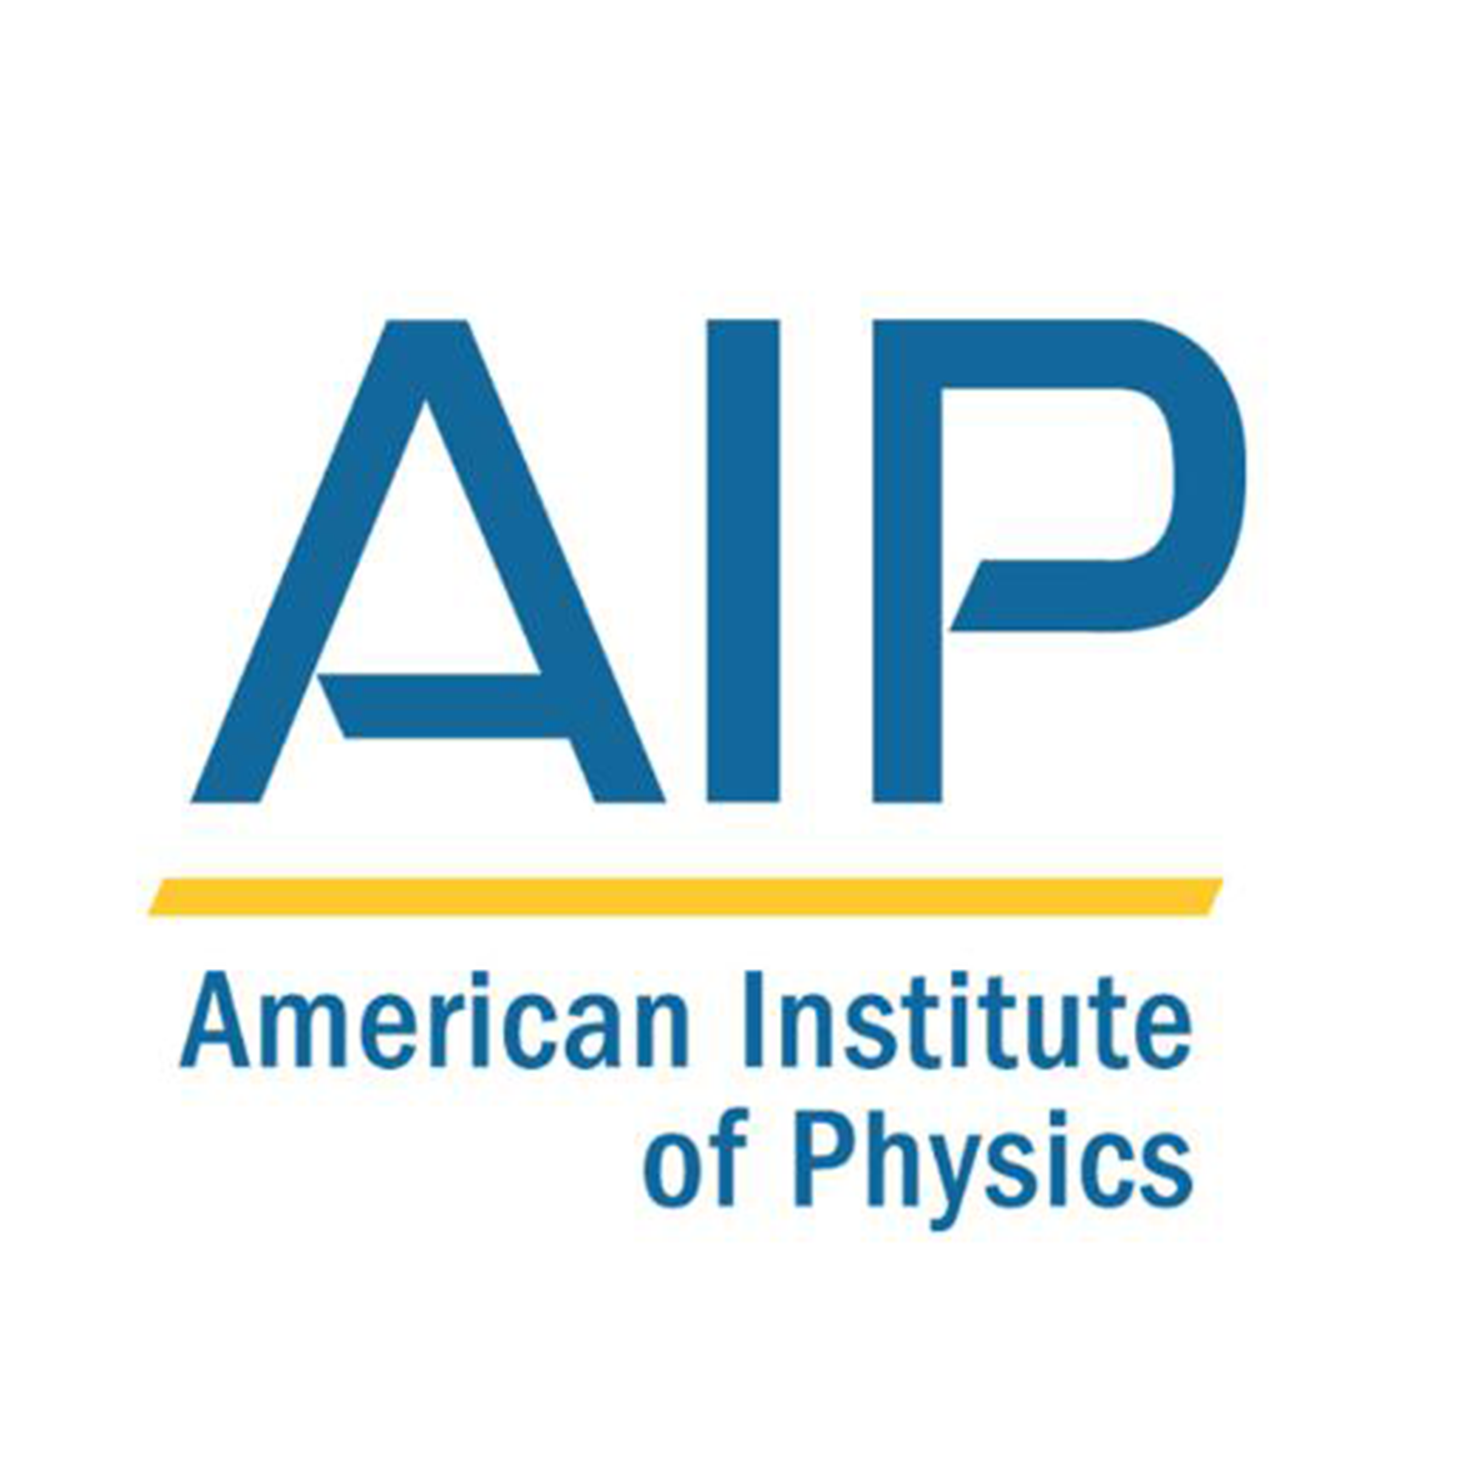 Srcd Signs On To American Institute Of Physics Letter Regarding The Executive Order On